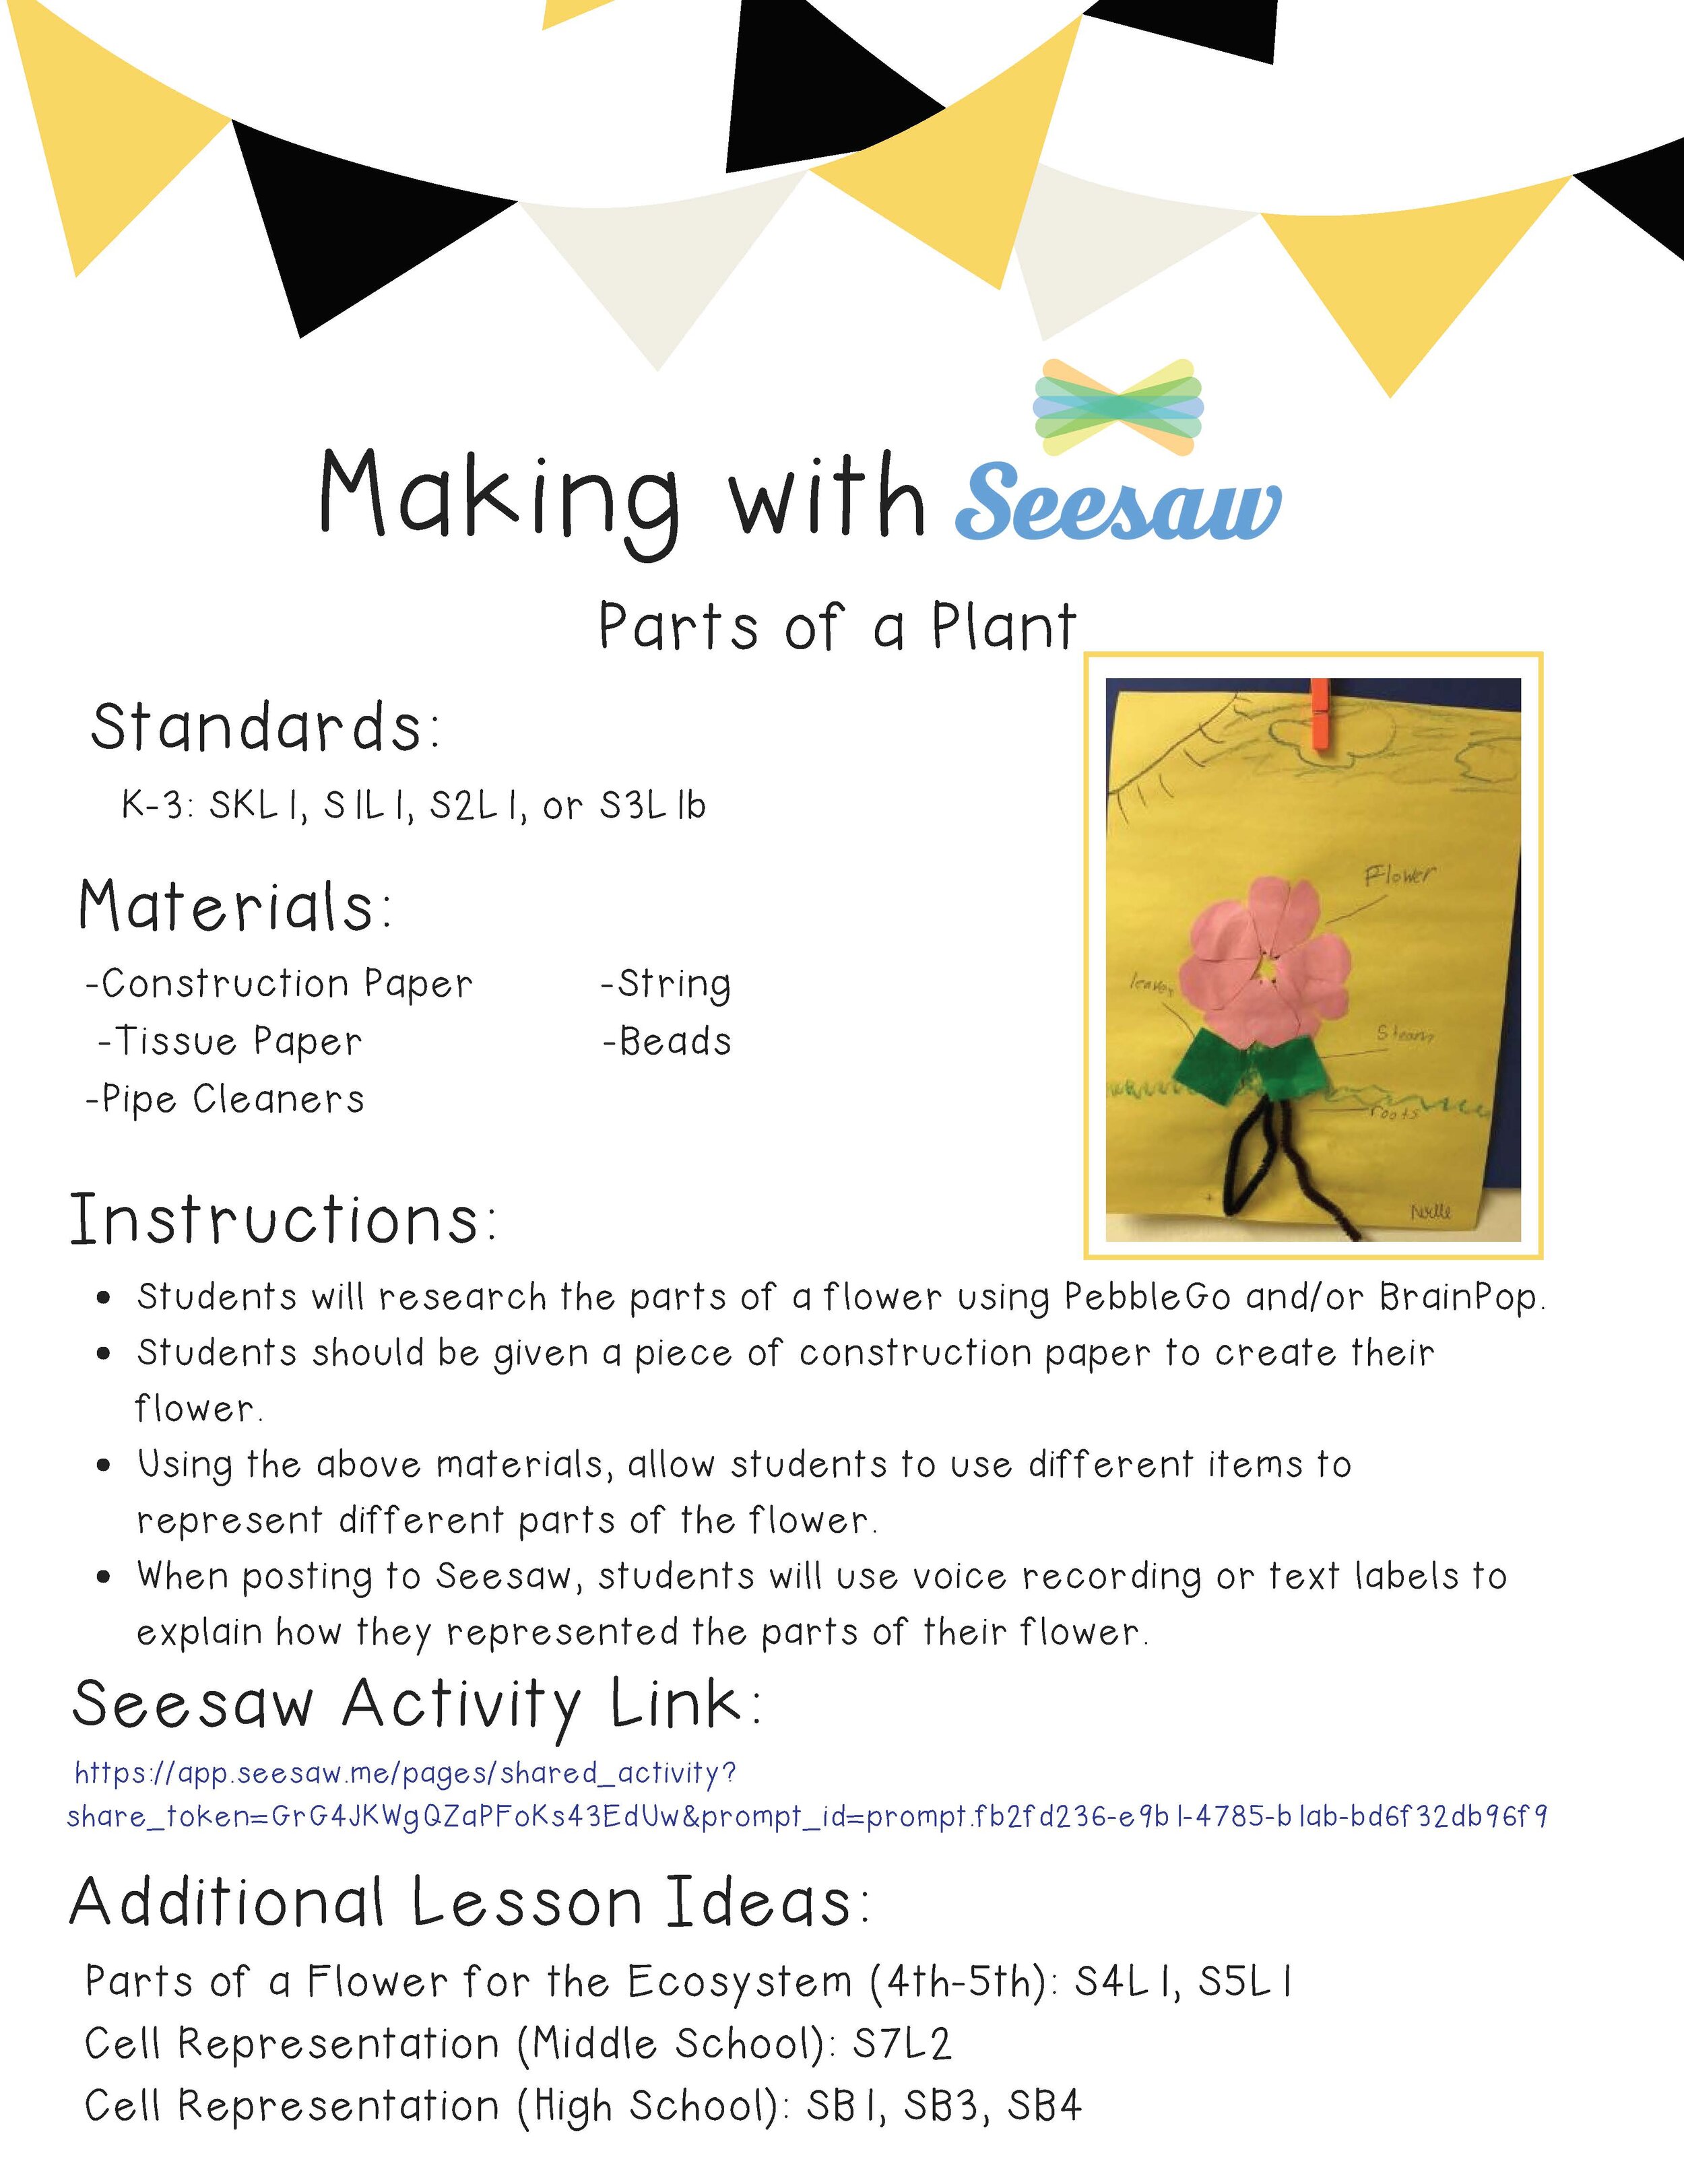 Making with Seesaw flower.jpg